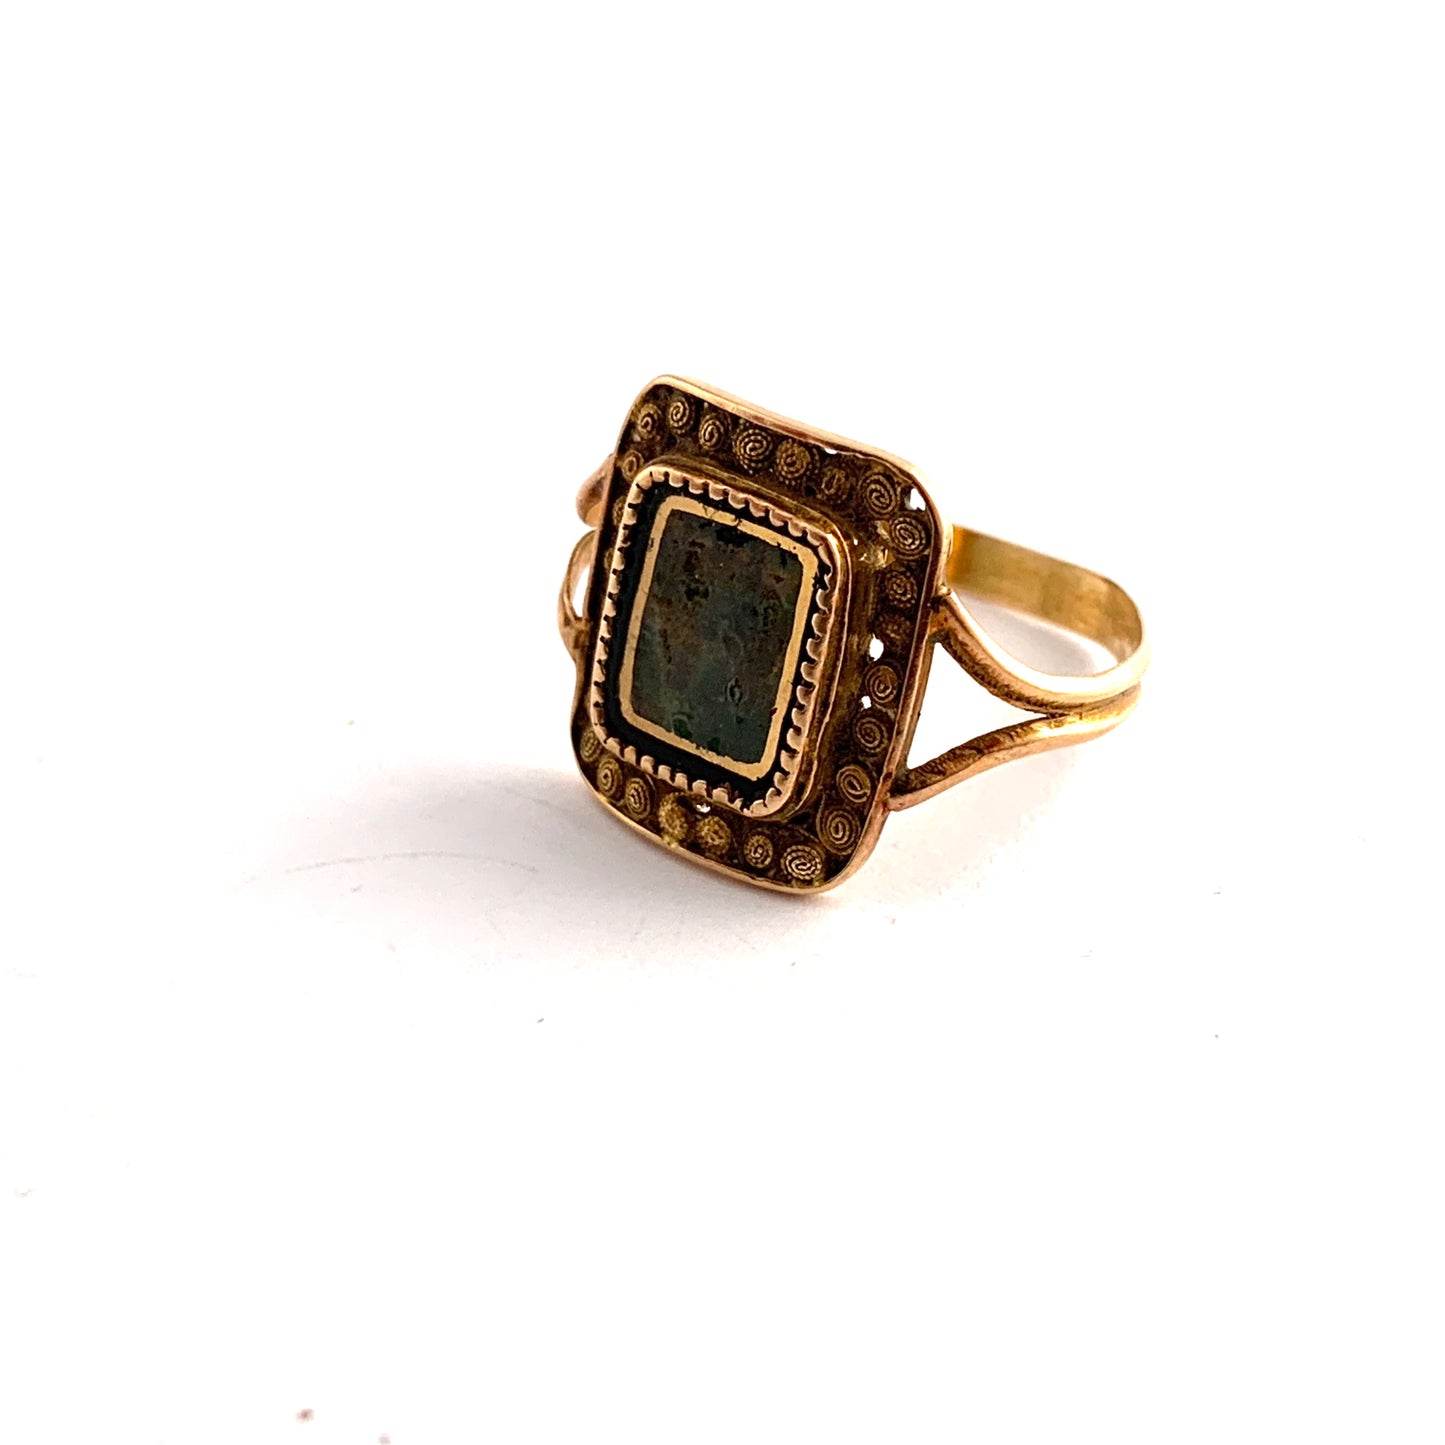 P A Thomason, Sweden 1845. Antique Reversed Painted Glass Ring.